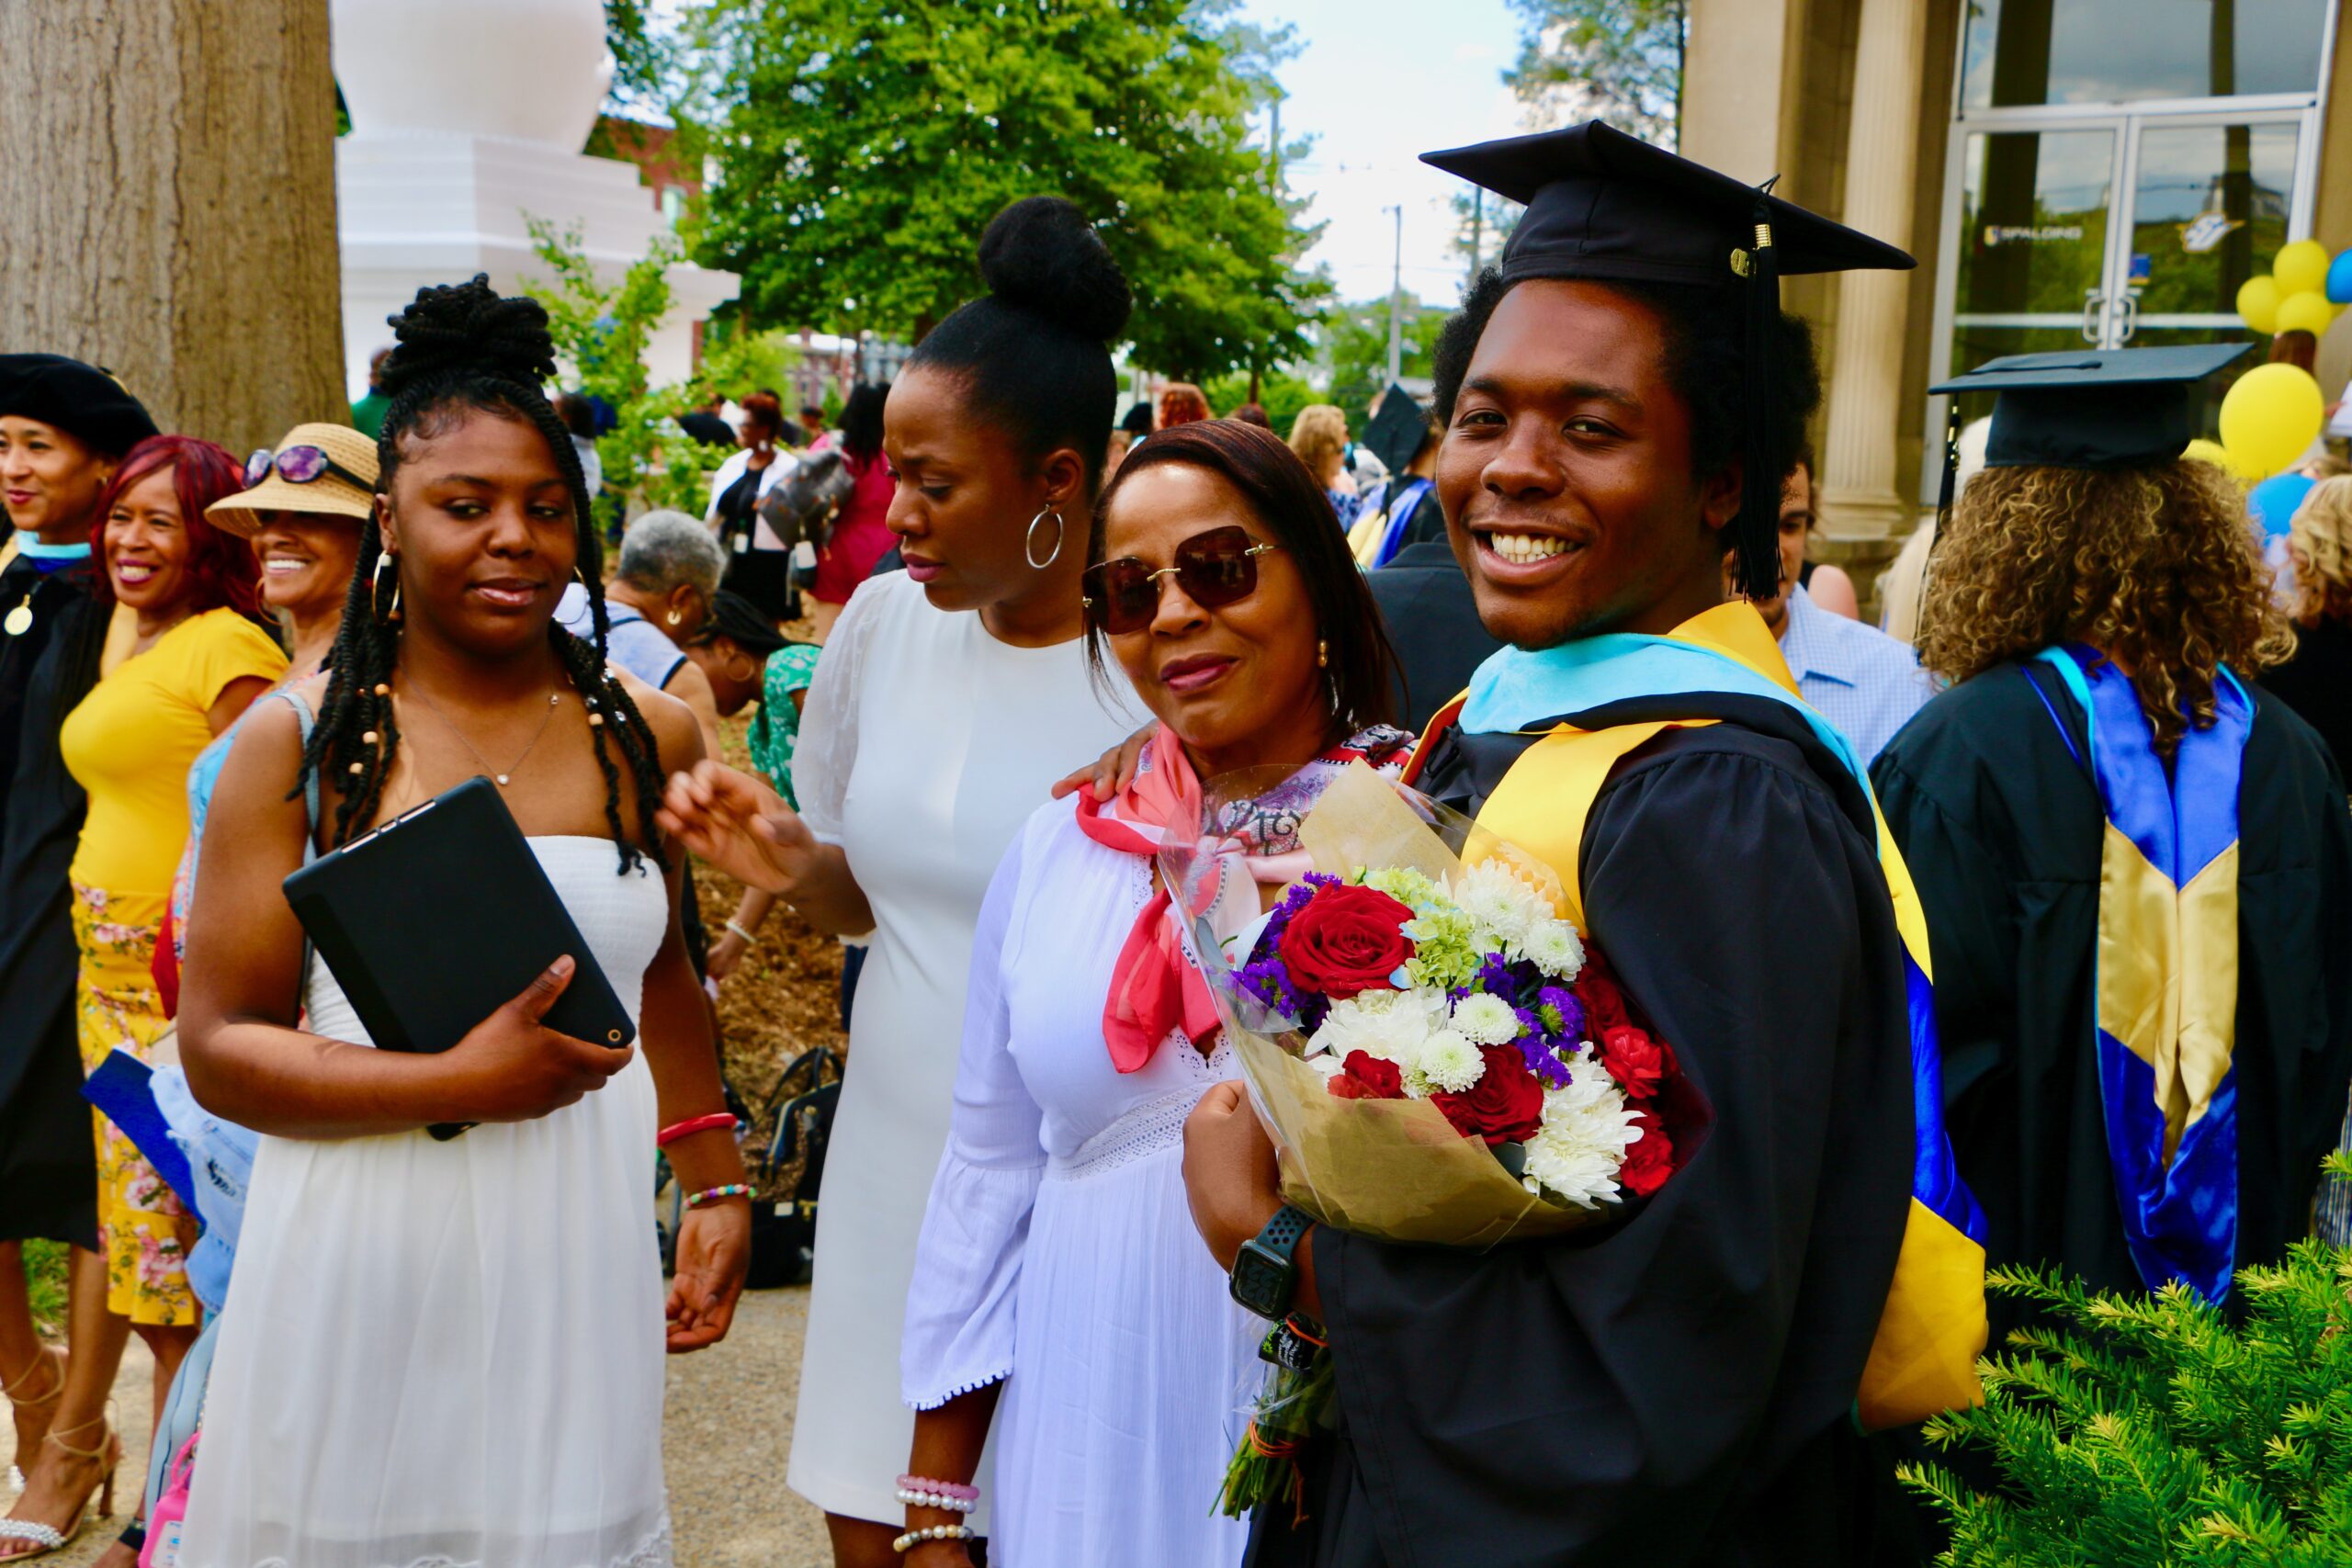 Spalding master's graduate posing with family members outside